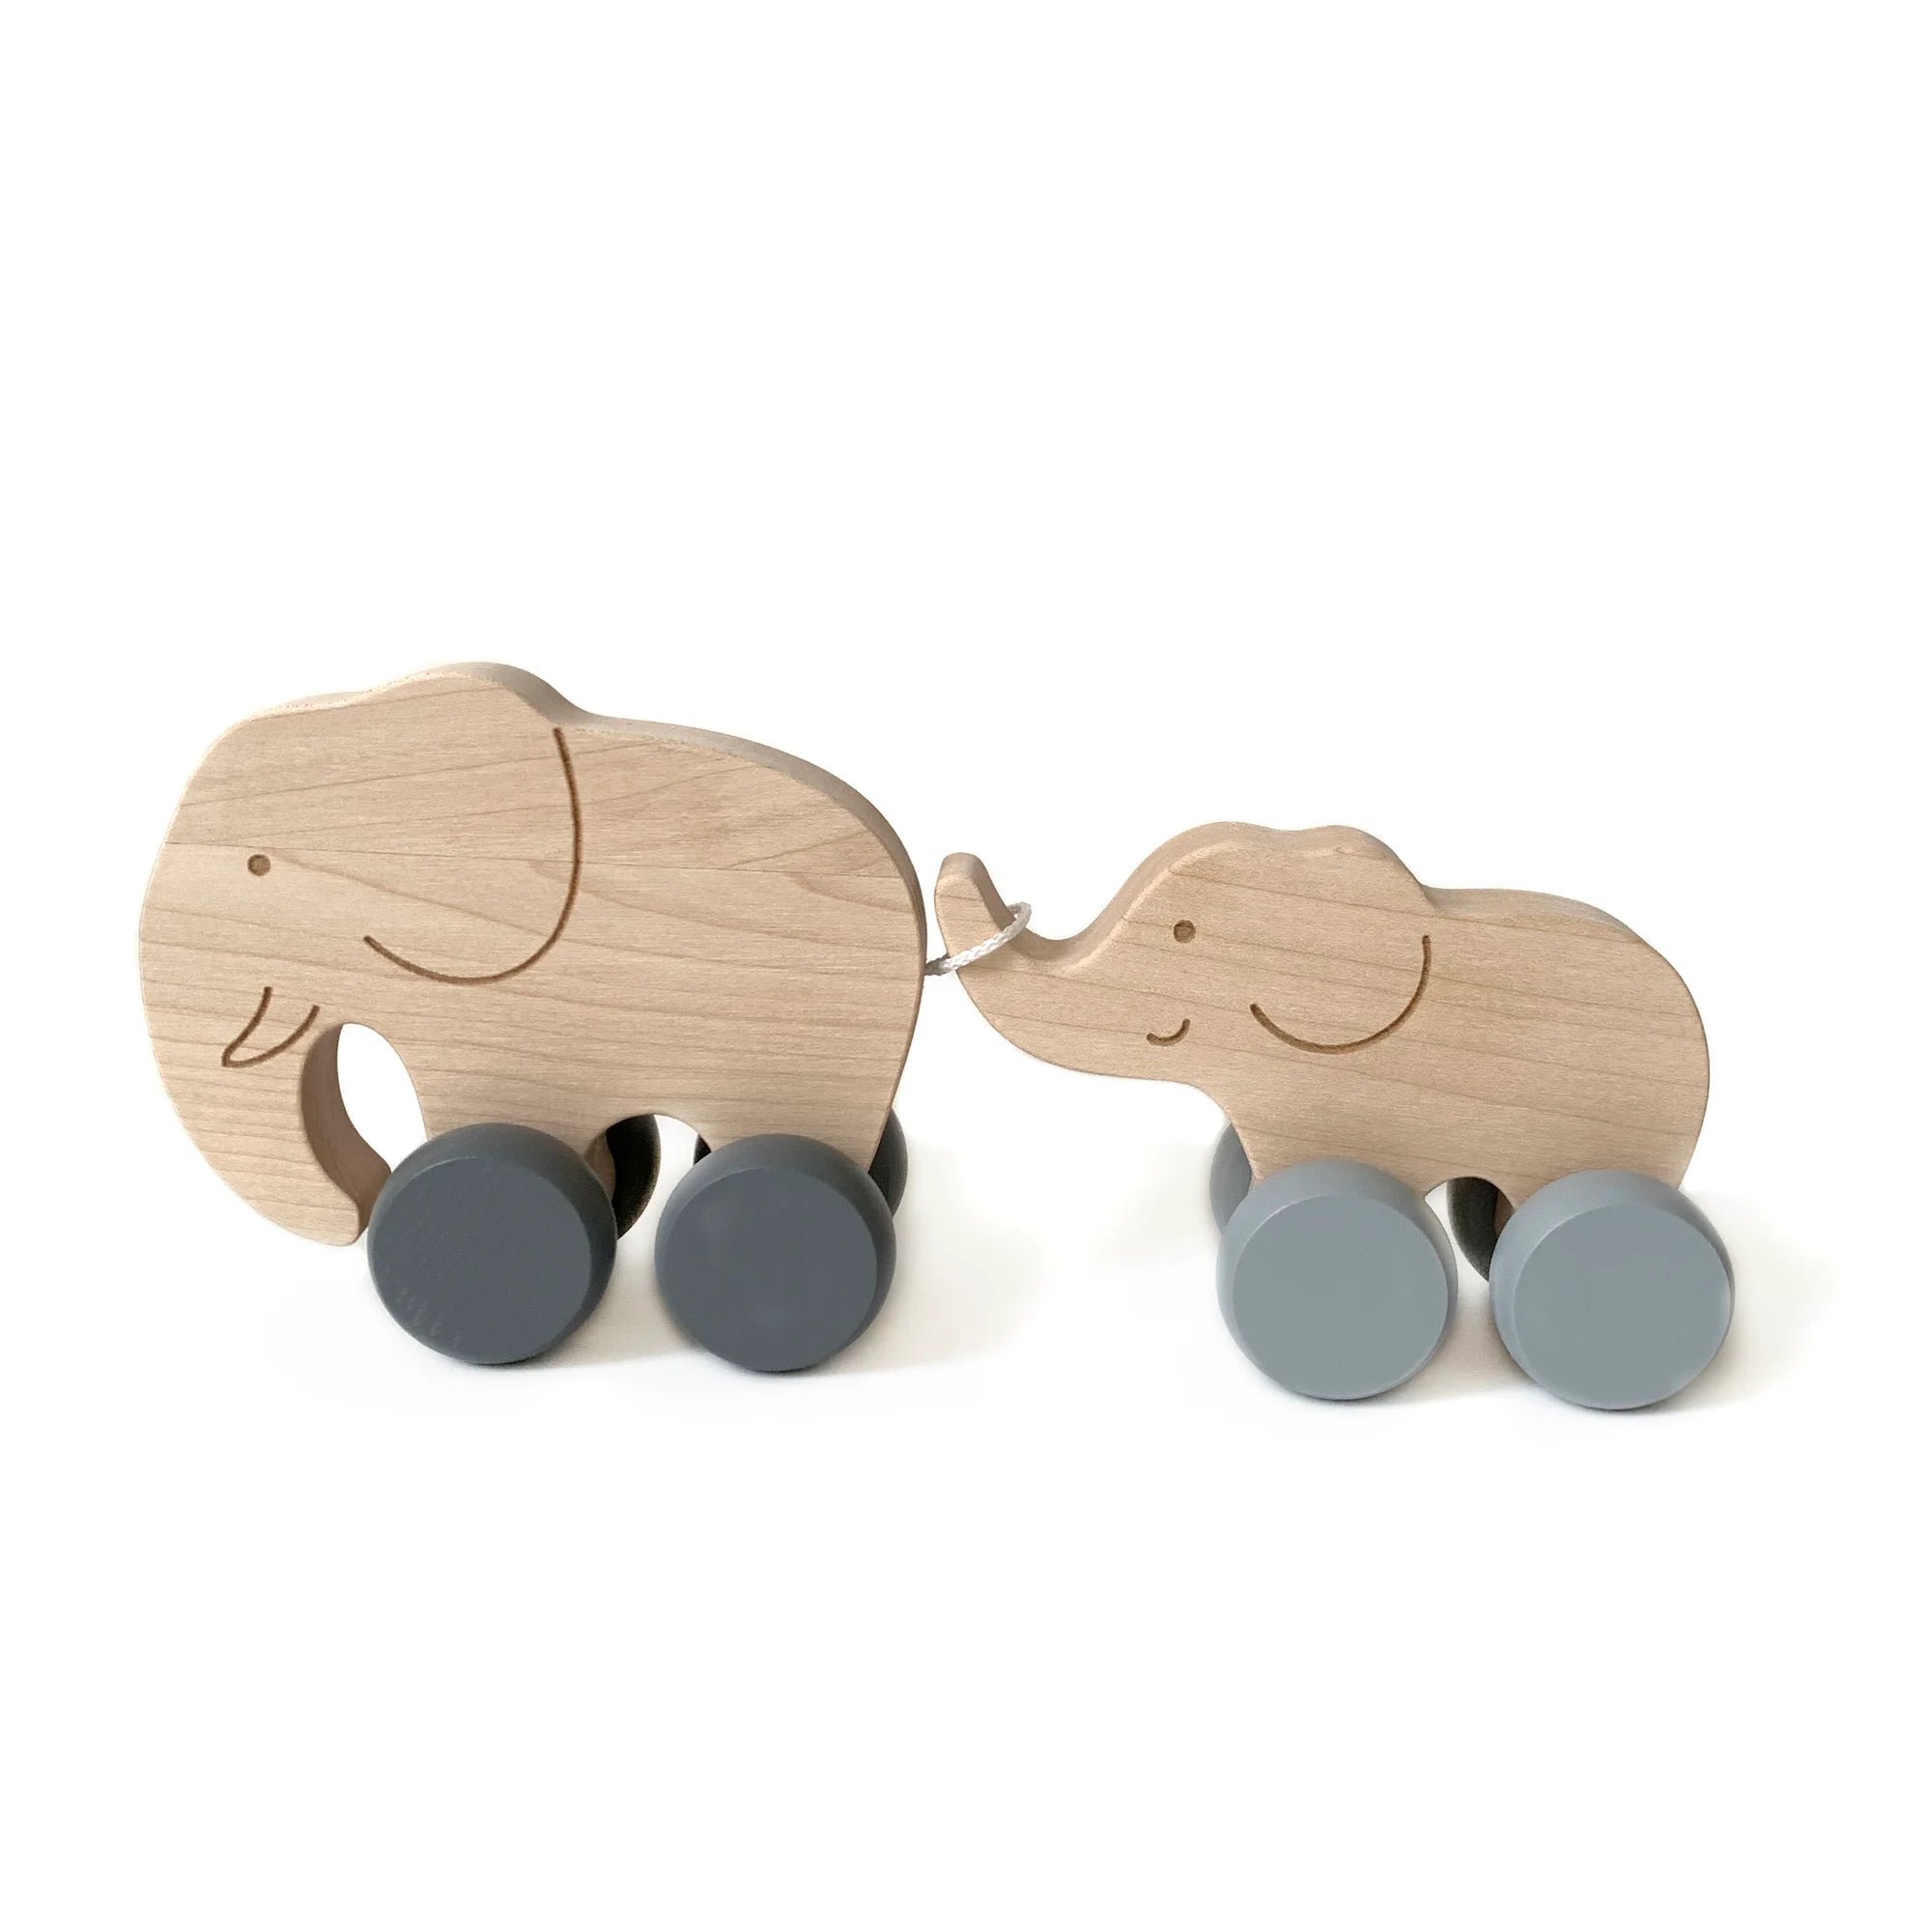 Wooden toy - mom and baby elephants